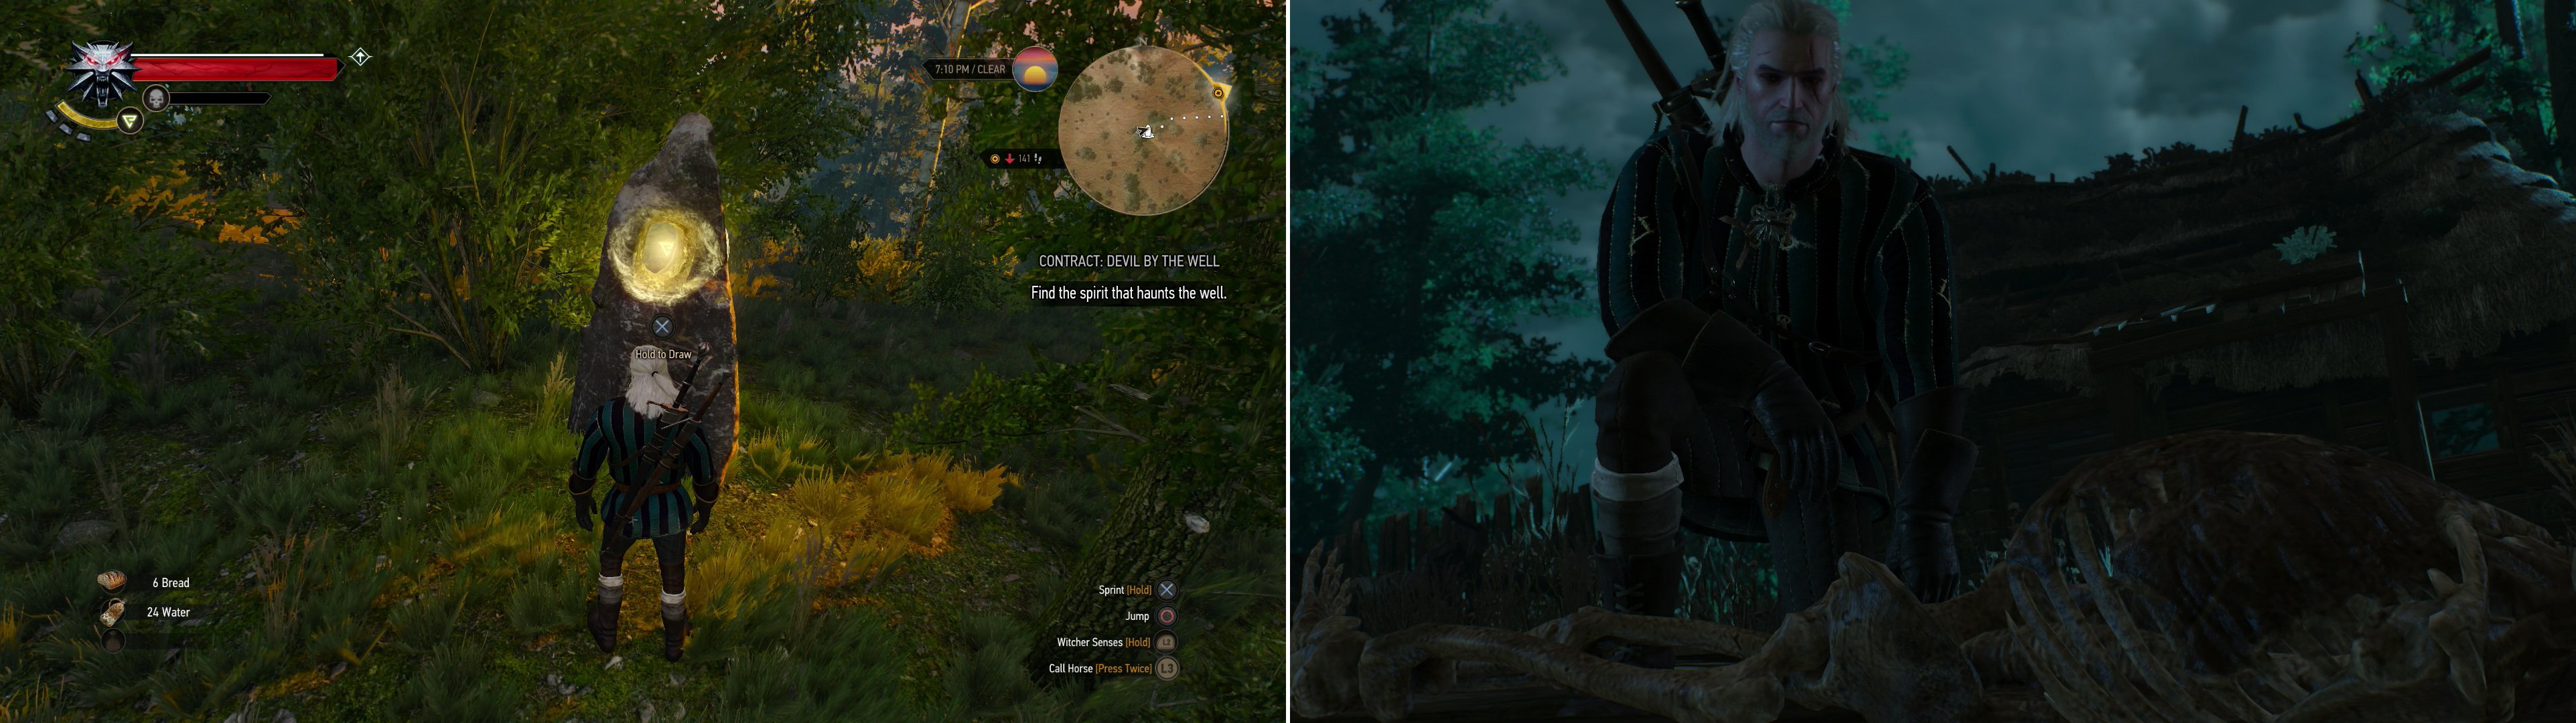 Draw from the Place of Power to gain an ability point (left). Search the abandoned village to make a gruesome discovery in the well (right).